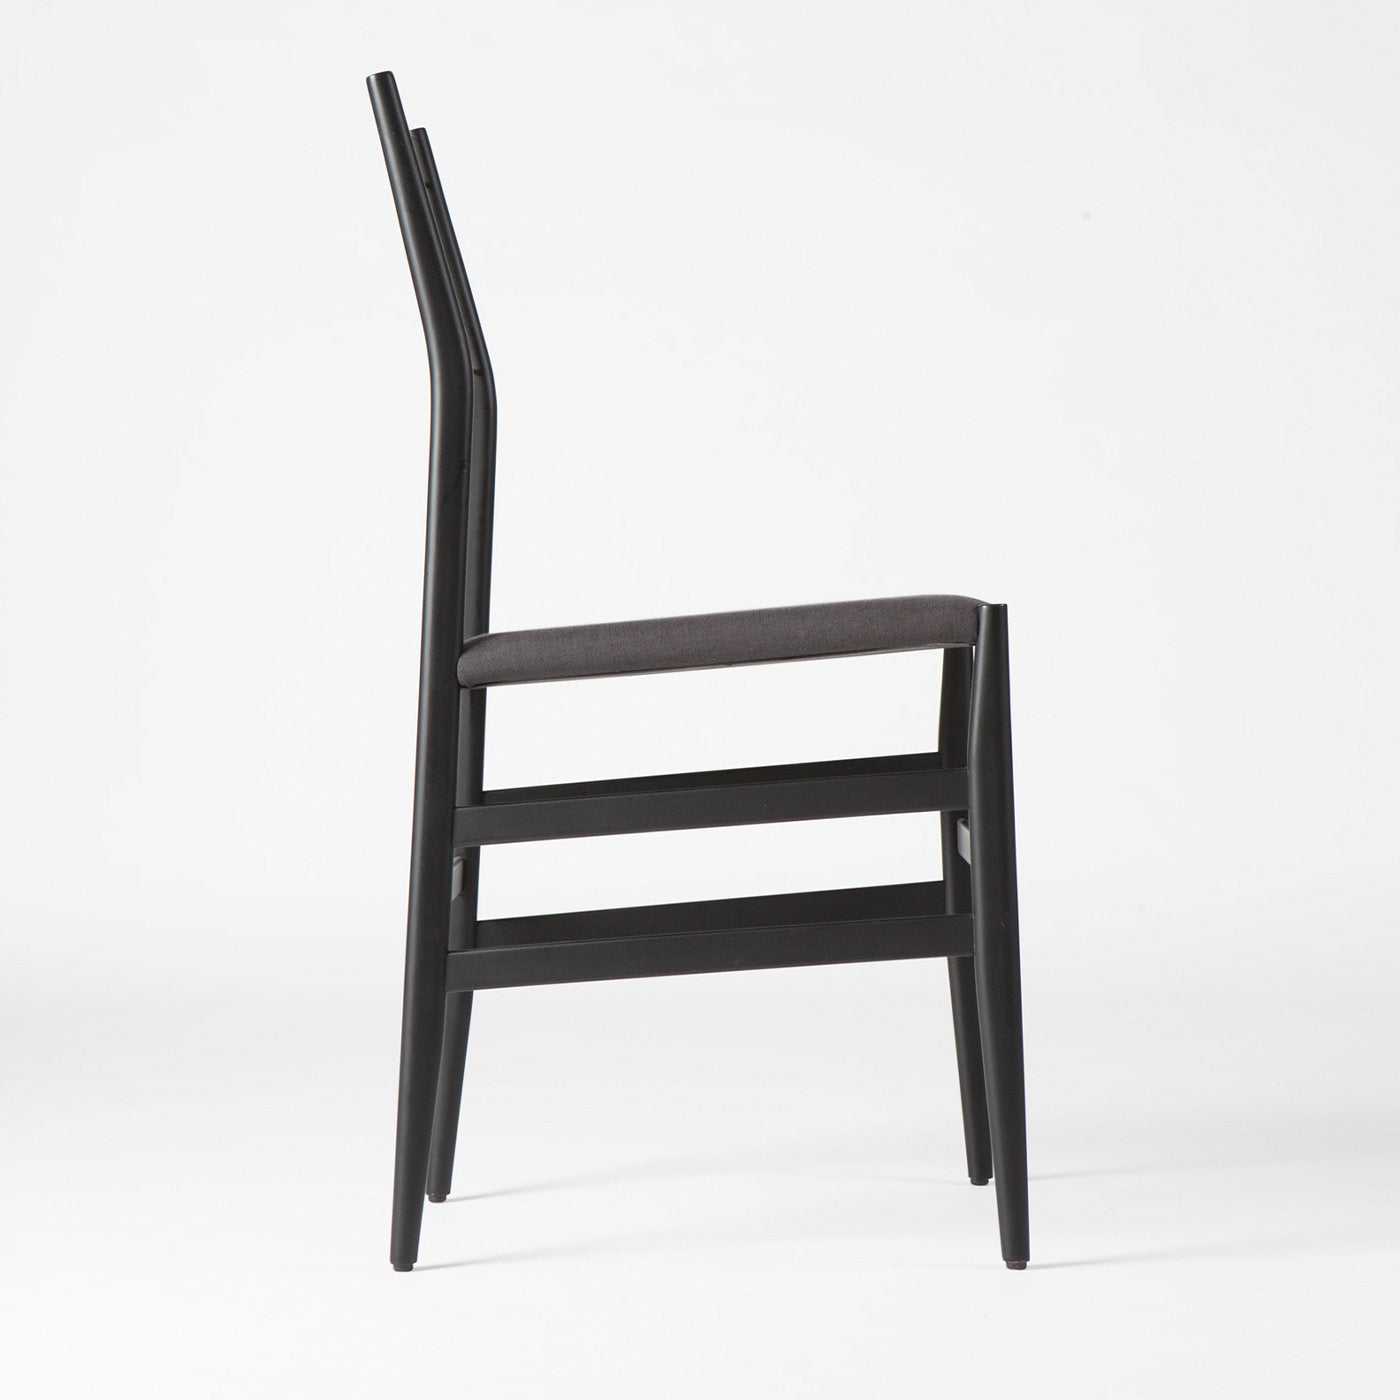 Piuma Black Chair with White Leather Seat - Alternative view 2